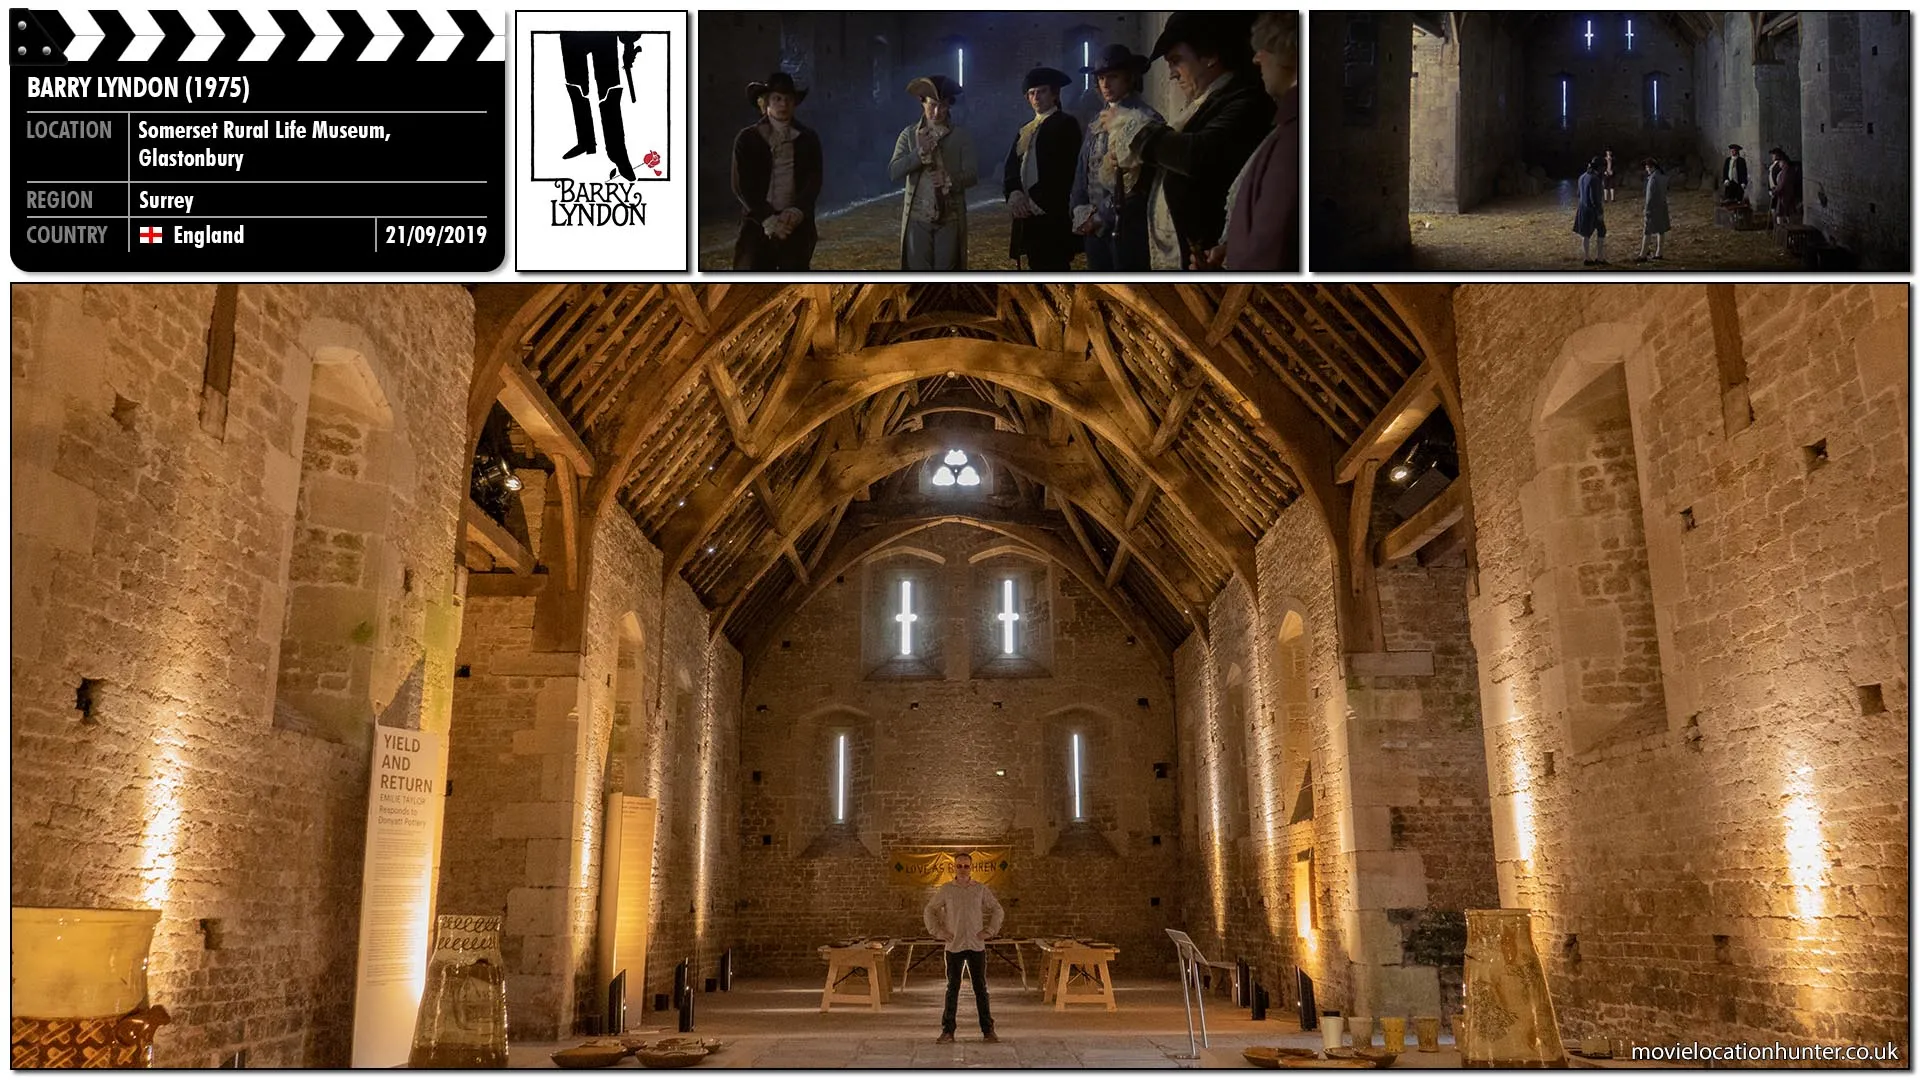 Filming location photo, shot in England, for Barry Lyndon (1975). Scene description: The duel with pistols is held in a tithe barn. A coin-toss gives Lord Bullingdon (Leon Vitali) the right of first fire, but he nervously misfires his pistol as he prepares to shoot. Barry (Ryan O'Neal), reluctant to shoot Bullingdon, magnanimously fires into the ground, but the unmoved Bullingdon refuses to let the duel end, claiming he has not received 